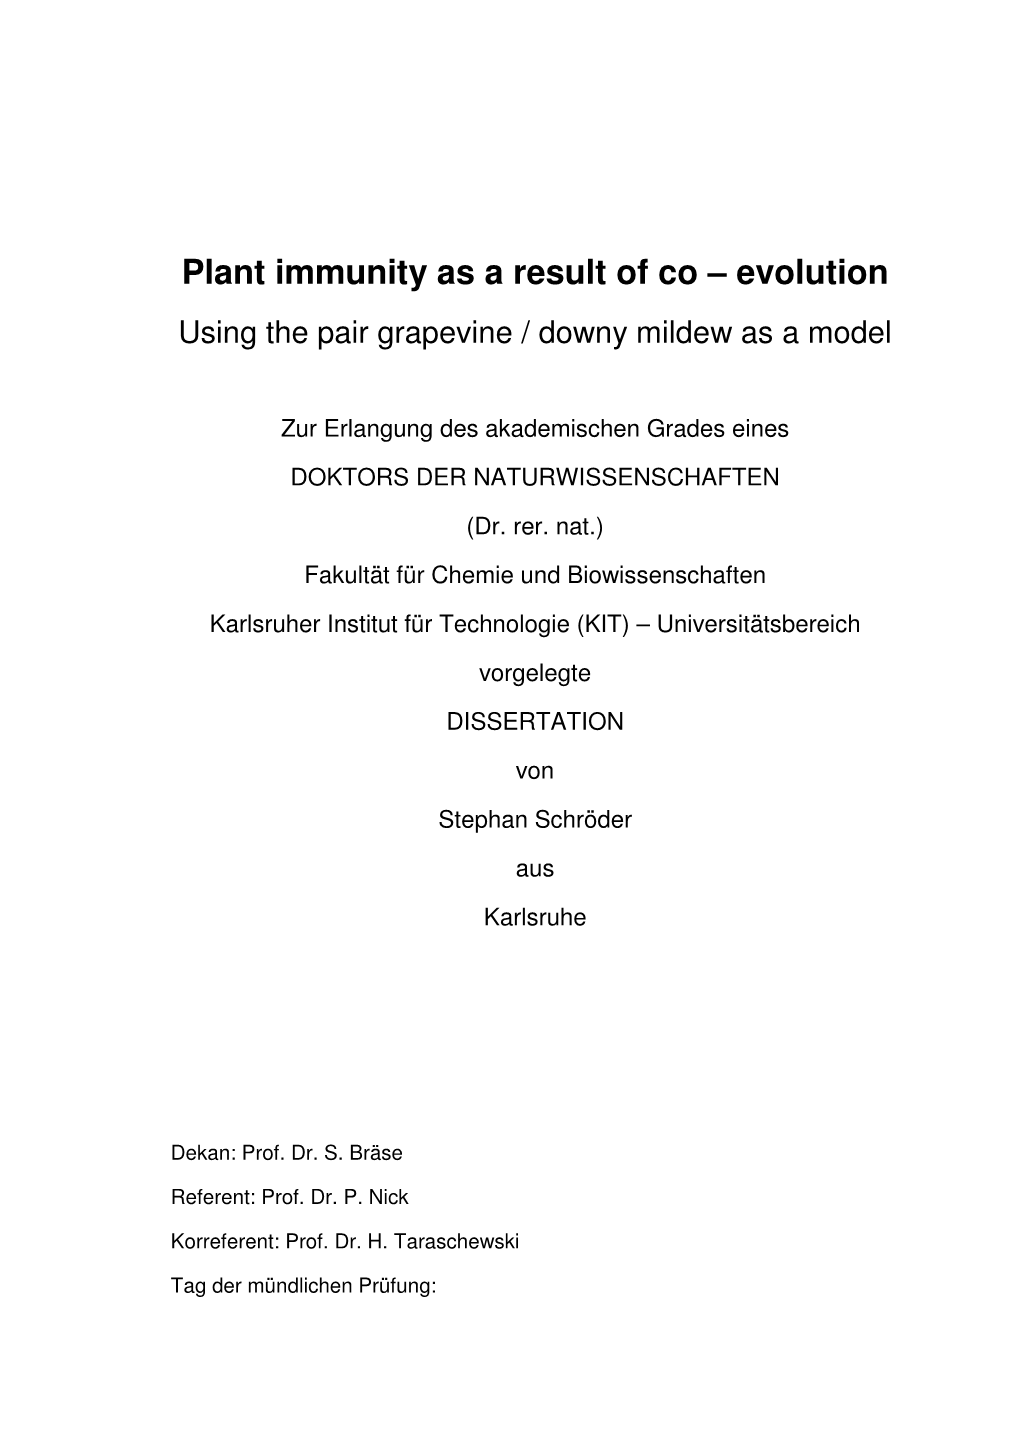 Plant Immunity As a Result of Co–Evolution